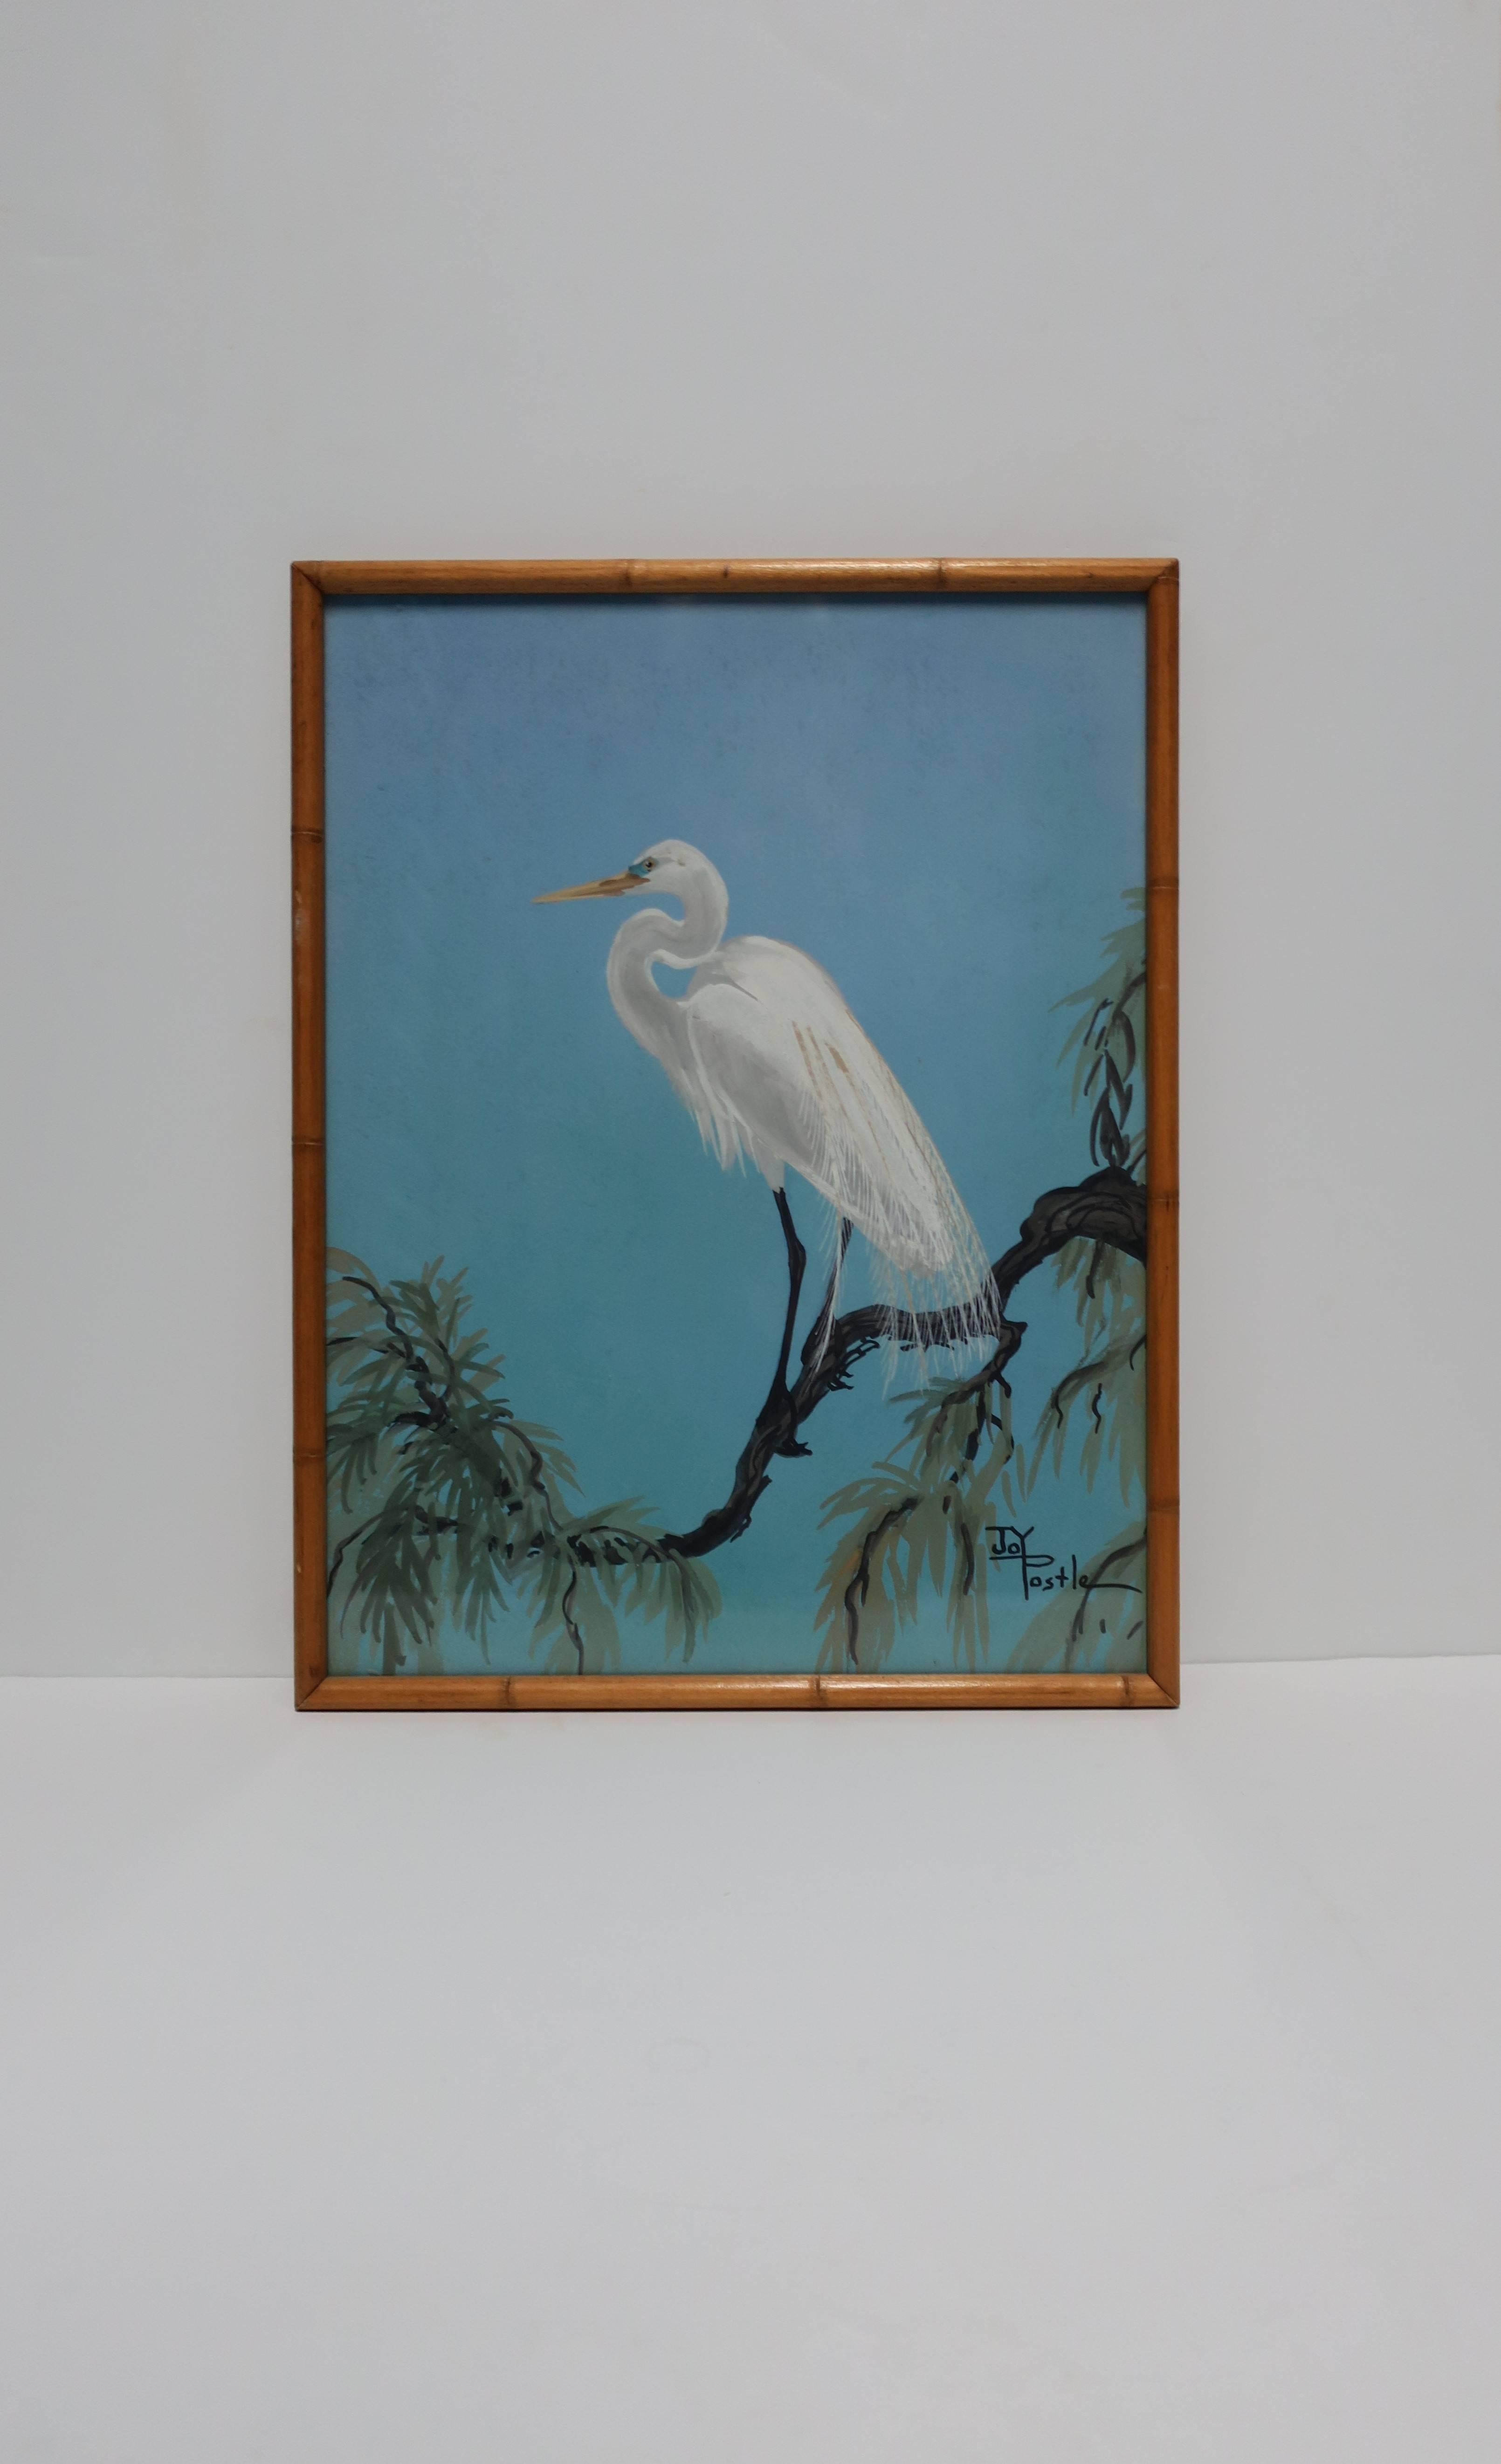 A signed vintage watercolor painting by Artist Joy Postle. Painting, with white Egret bird perched on a tree branch and a turquoise blue sky background, is embraced by a beautiful wood frame in a faux bamboo style. Artist: American, Joy Postle,